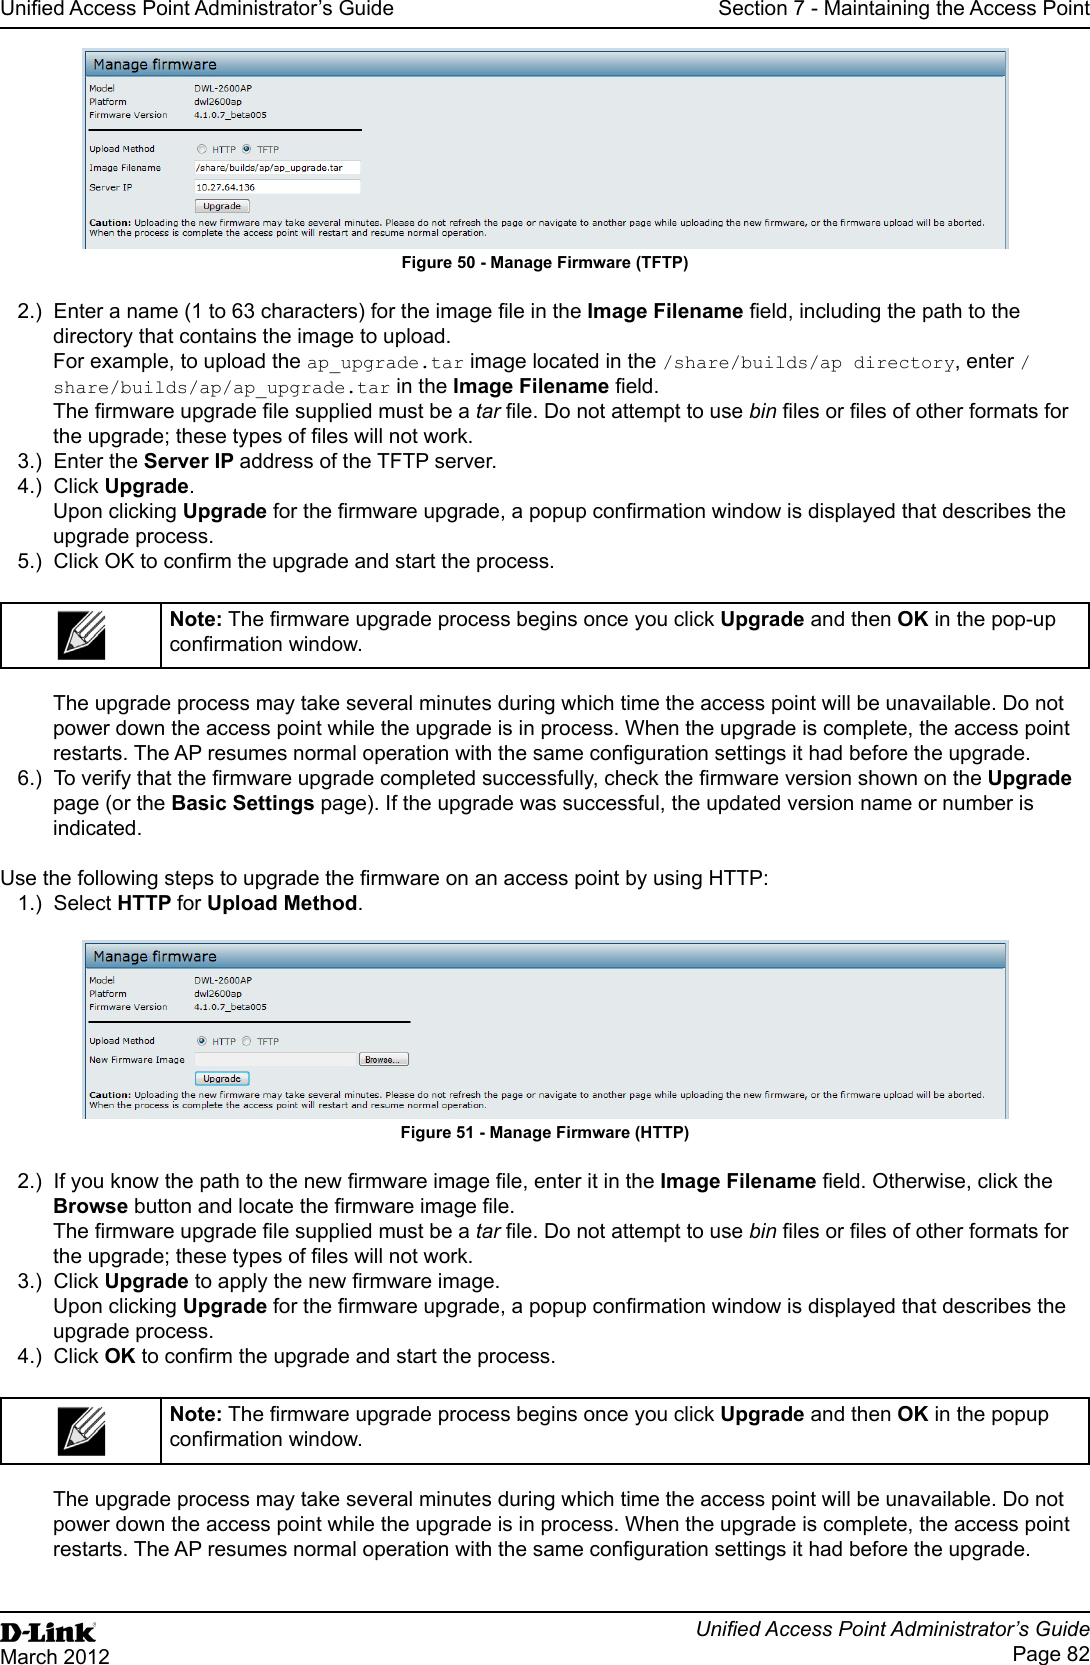 Unied Access Point Administrator’s GuideUnied Access Point Administrator’s GuidePage 82March 2012Section 7 - Maintaining the Access PointFigure 50 - Manage Firmware (TFTP)2.)  Enter a name (1 to 63 characters) for the image le in the Image Filename eld, including the path to the directory that contains the image to upload.For example, to upload the ap_upgrade.tar image located in the /share/builds/ap directory, enter /share/builds/ap/ap_upgrade.tar in the Image Filename eld.The rmware upgrade le supplied must be a tar le. Do not attempt to use bin les or les of other formats for the upgrade; these types of les will not work.3.)  Enter the Server IP address of the TFTP server. 4.)  Click Upgrade.Upon clicking Upgrade for the rmware upgrade, a popup conrmation window is displayed that describes the upgrade process.5.)  Click OK to conrm the upgrade and start the process.Note: The rmware upgrade process begins once you click Upgrade and then OK in the pop-up conrmation window.The upgrade process may take several minutes during which time the access point will be unavailable. Do not power down the access point while the upgrade is in process. When the upgrade is complete, the access point restarts. The AP resumes normal operation with the same conguration settings it had before the upgrade.6.)  To verify that the rmware upgrade completed successfully, check the rmware version shown on the Upgrade page (or the Basic Settings page). If the upgrade was successful, the updated version name or number is indicated.Use the following steps to upgrade the rmware on an access point by using HTTP:1.)  Select HTTP for Upload Method.Figure 51 - Manage Firmware (HTTP)2.)  If you know the path to the new rmware image le, enter it in the Image Filename eld. Otherwise, click the Browse button and locate the rmware image le.The rmware upgrade le supplied must be a tar le. Do not attempt to use bin les or les of other formats for the upgrade; these types of les will not work.3.)  Click Upgrade to apply the new rmware image.Upon clicking Upgrade for the rmware upgrade, a popup conrmation window is displayed that describes the upgrade process.4.)  Click OK to conrm the upgrade and start the process.Note: The rmware upgrade process begins once you click Upgrade and then OK in the popup conrmation window.The upgrade process may take several minutes during which time the access point will be unavailable. Do not power down the access point while the upgrade is in process. When the upgrade is complete, the access point restarts. The AP resumes normal operation with the same conguration settings it had before the upgrade.